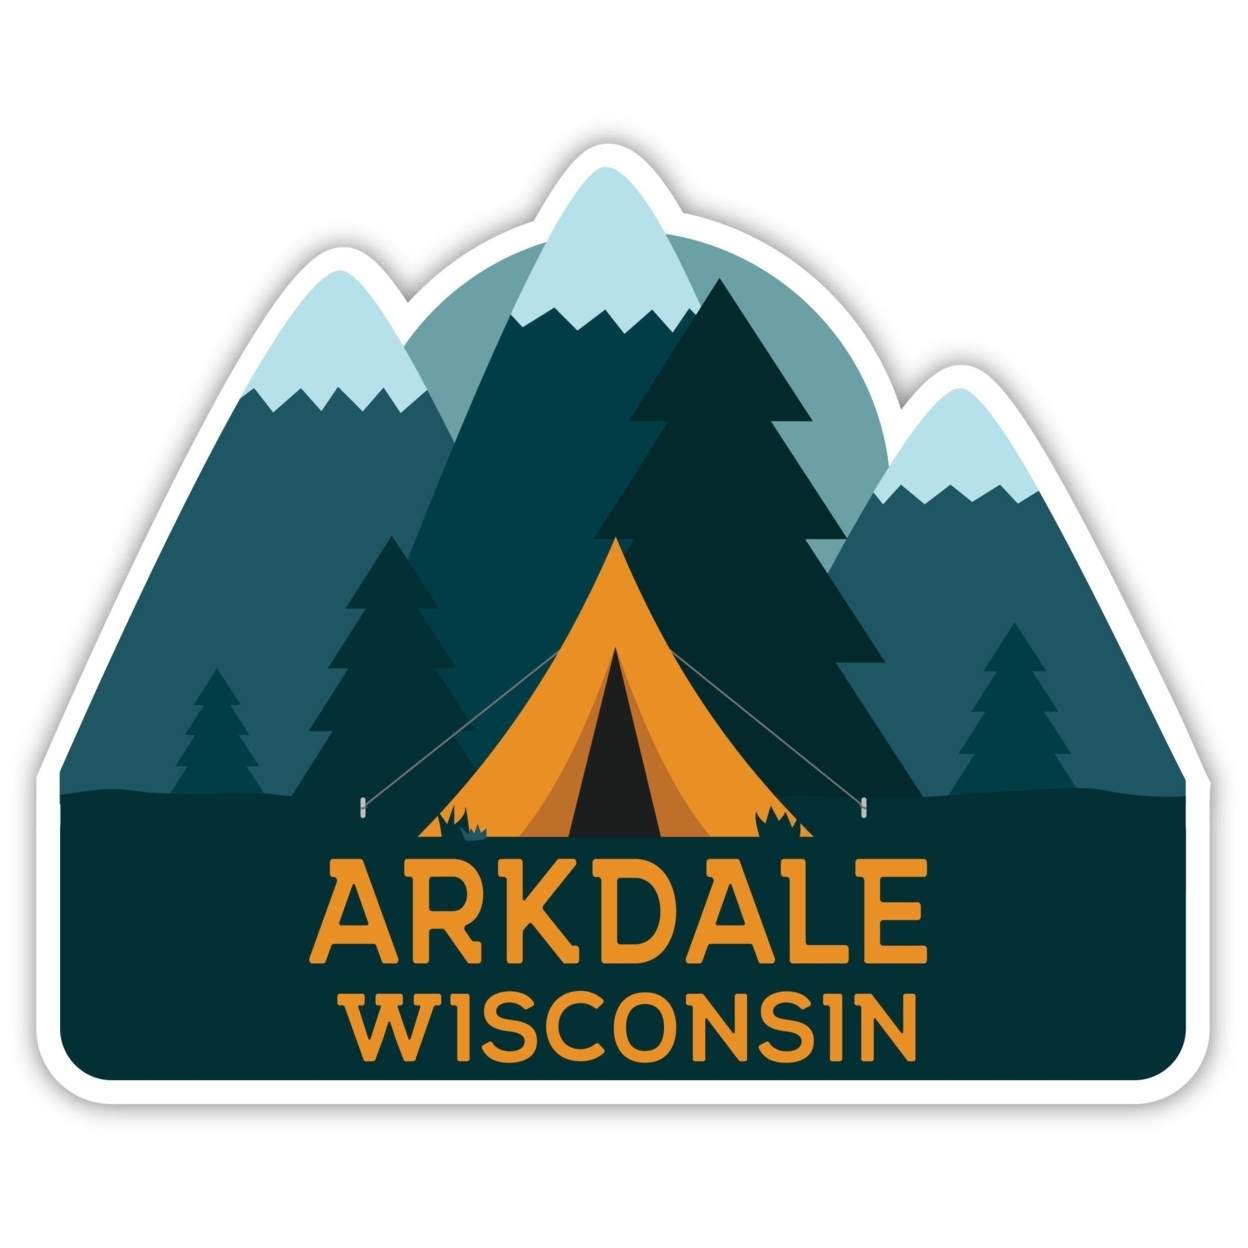 Arkdale Wisconsin Souvenir Decorative Stickers (Choose Theme And Size) - 4-Pack, 6-Inch, Tent